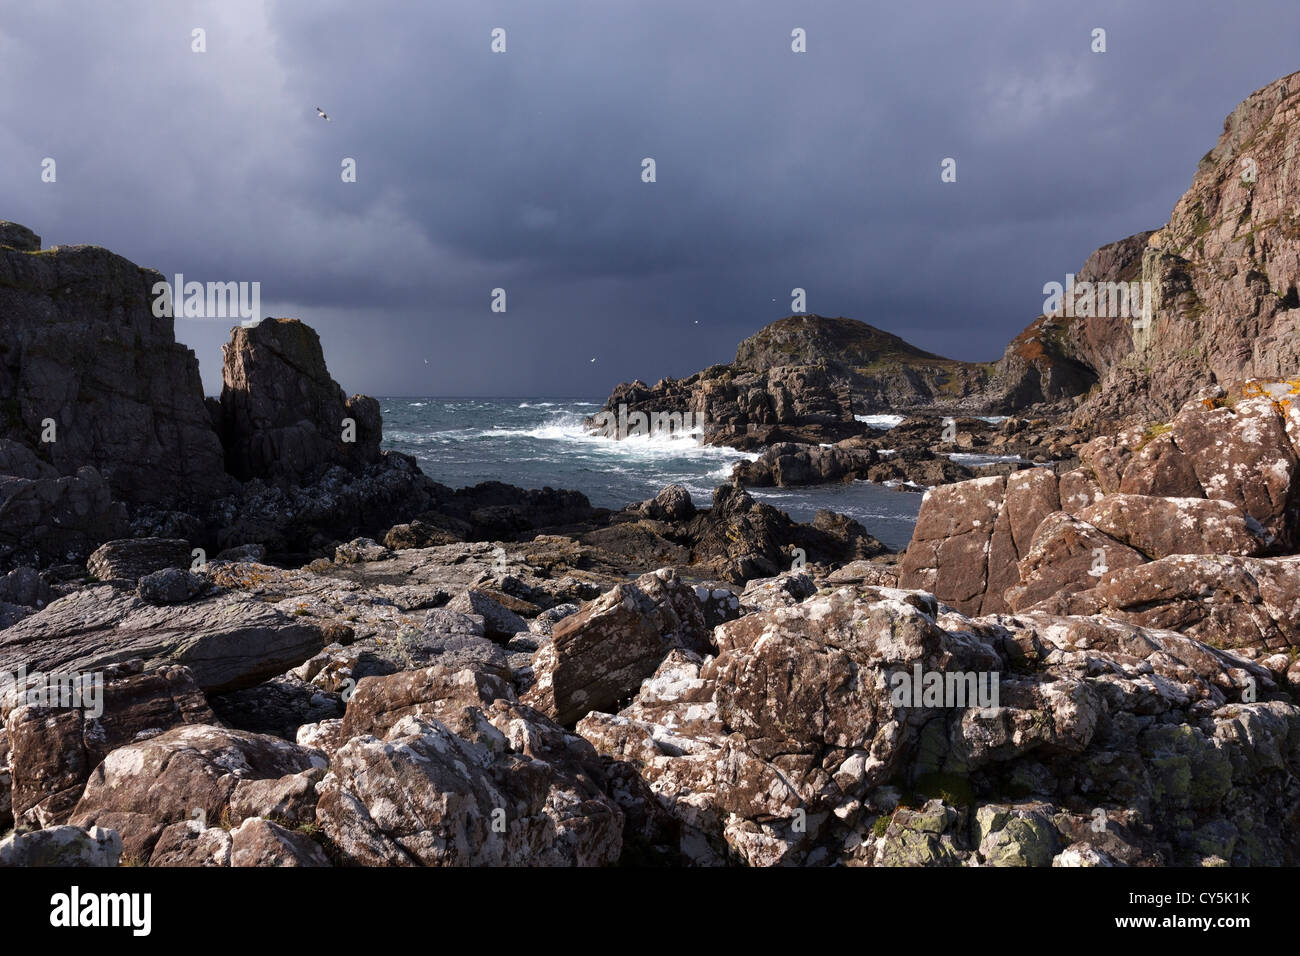 Stormy skies over rocky beach and headland at the Point of Sleat, Isle of Skye, Scotland, UK Stock Photo